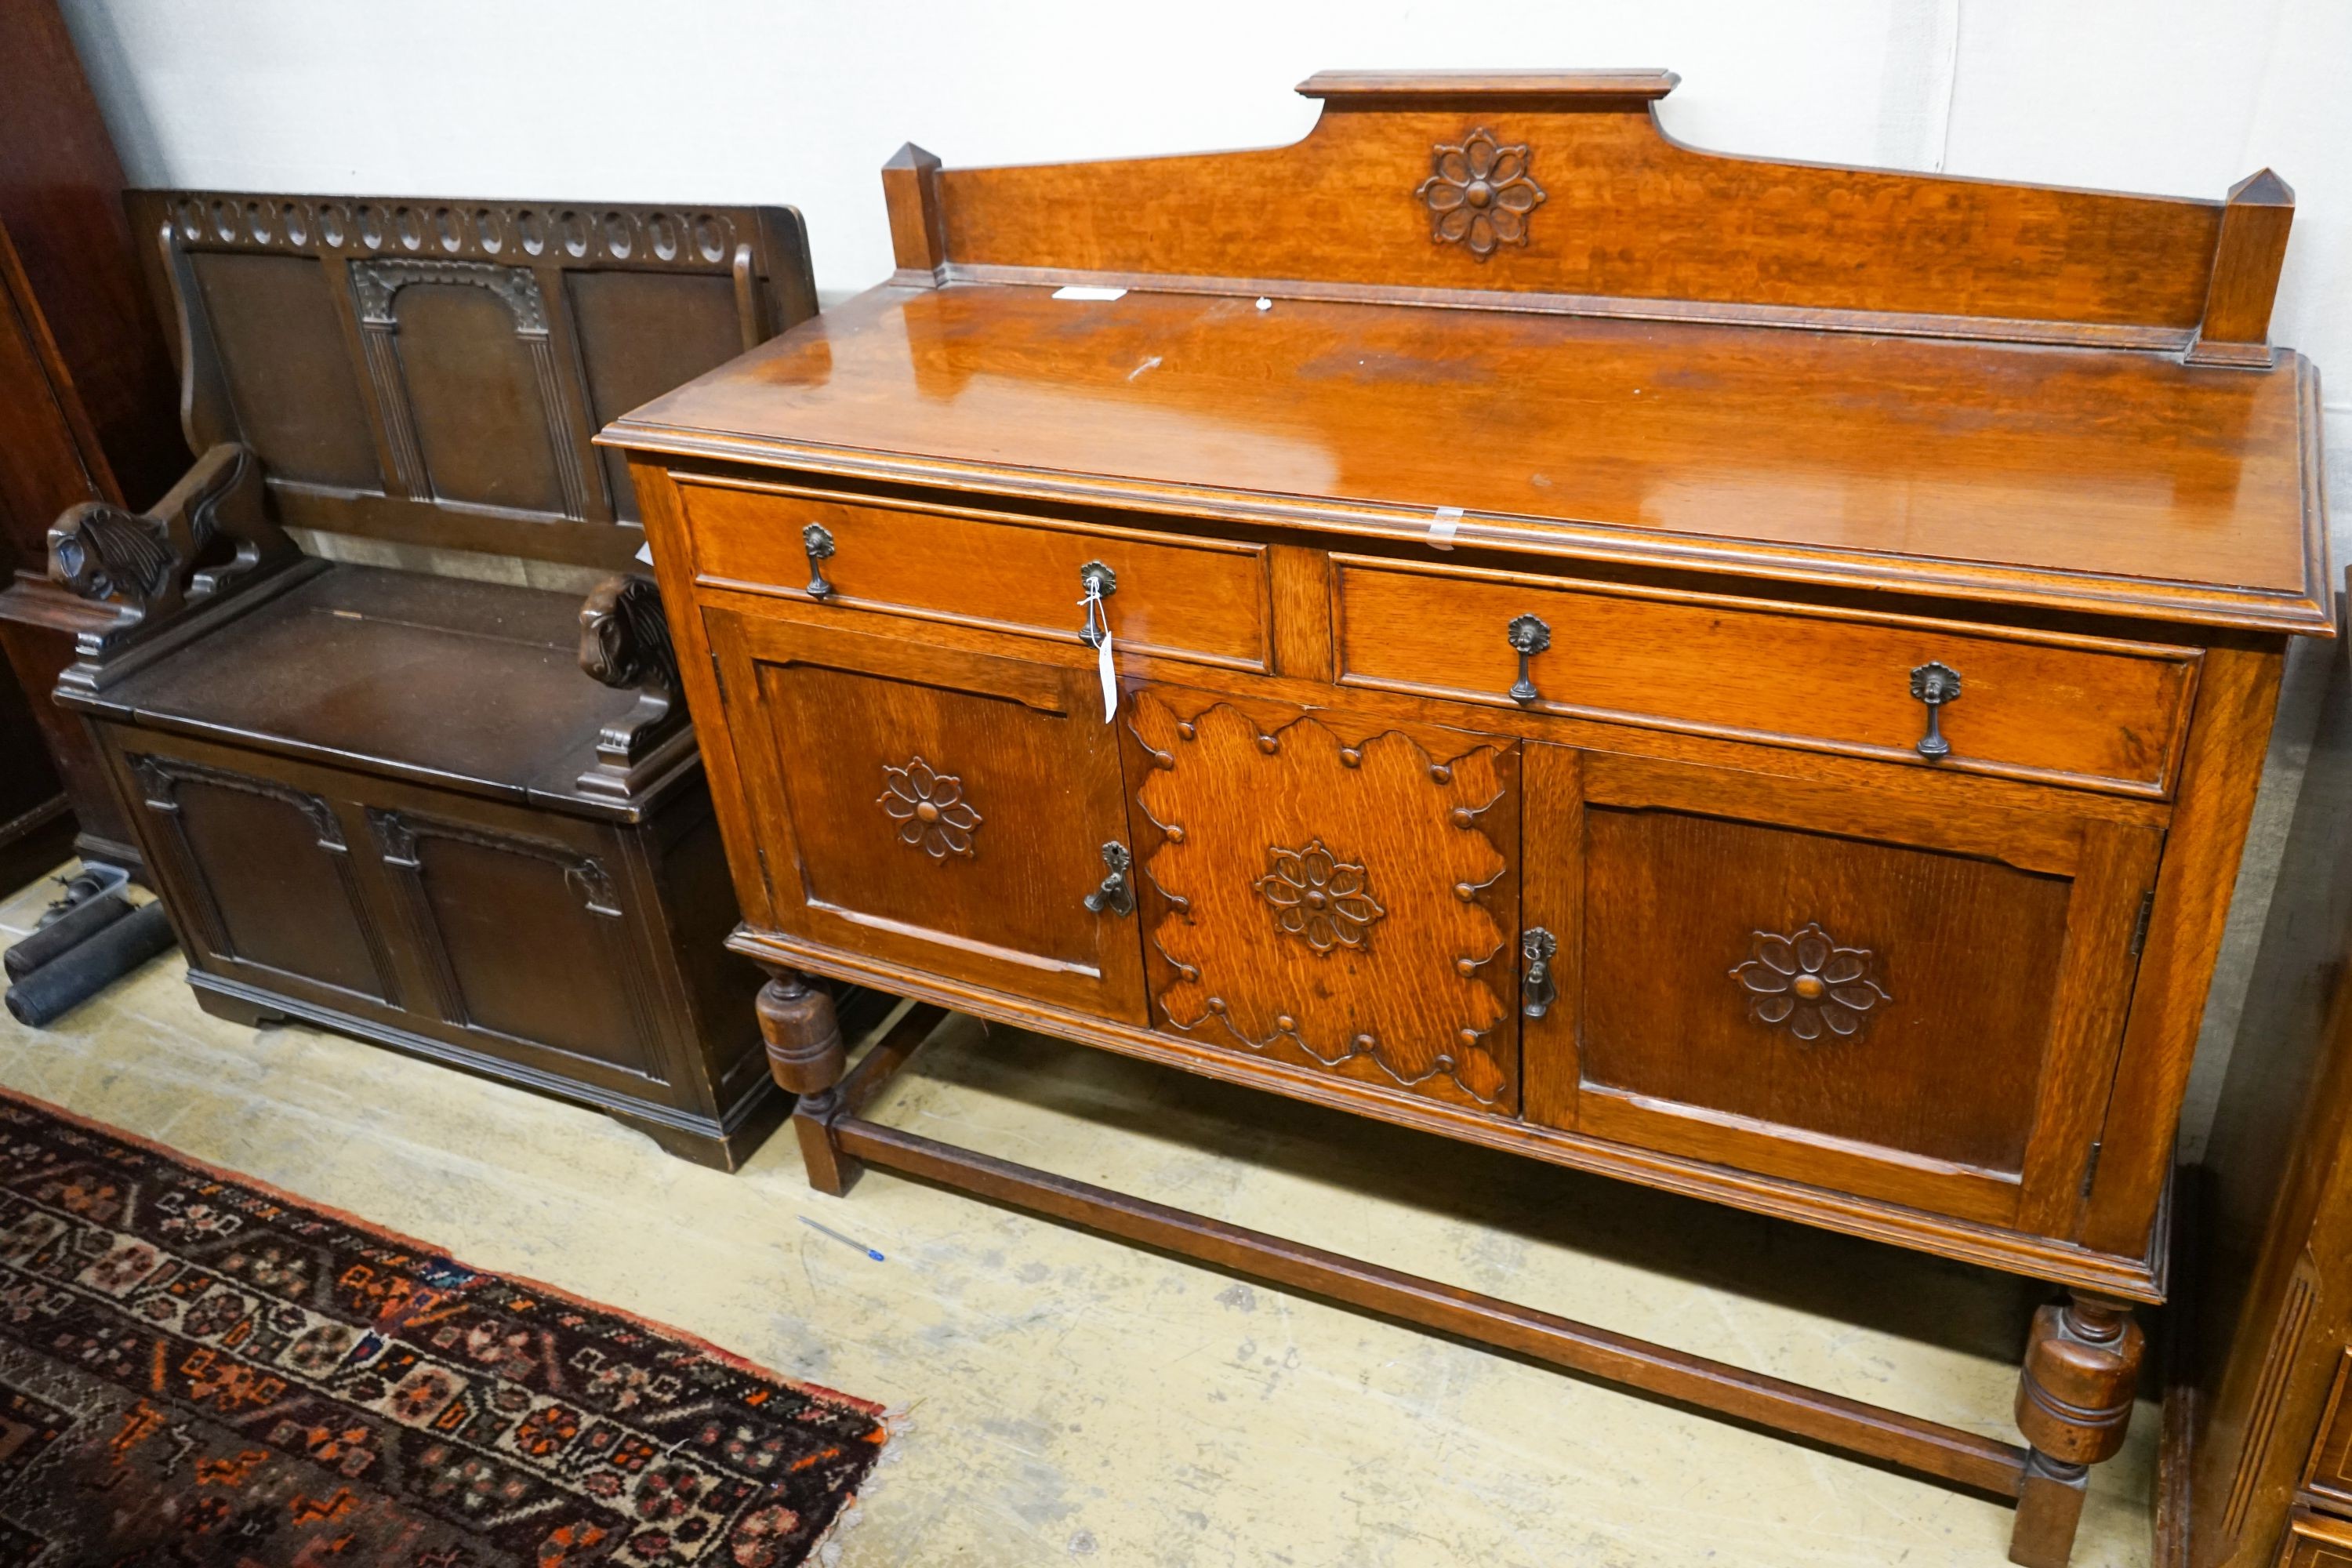 An 18th century style oak monks bench together with a 1920's oak sideboard